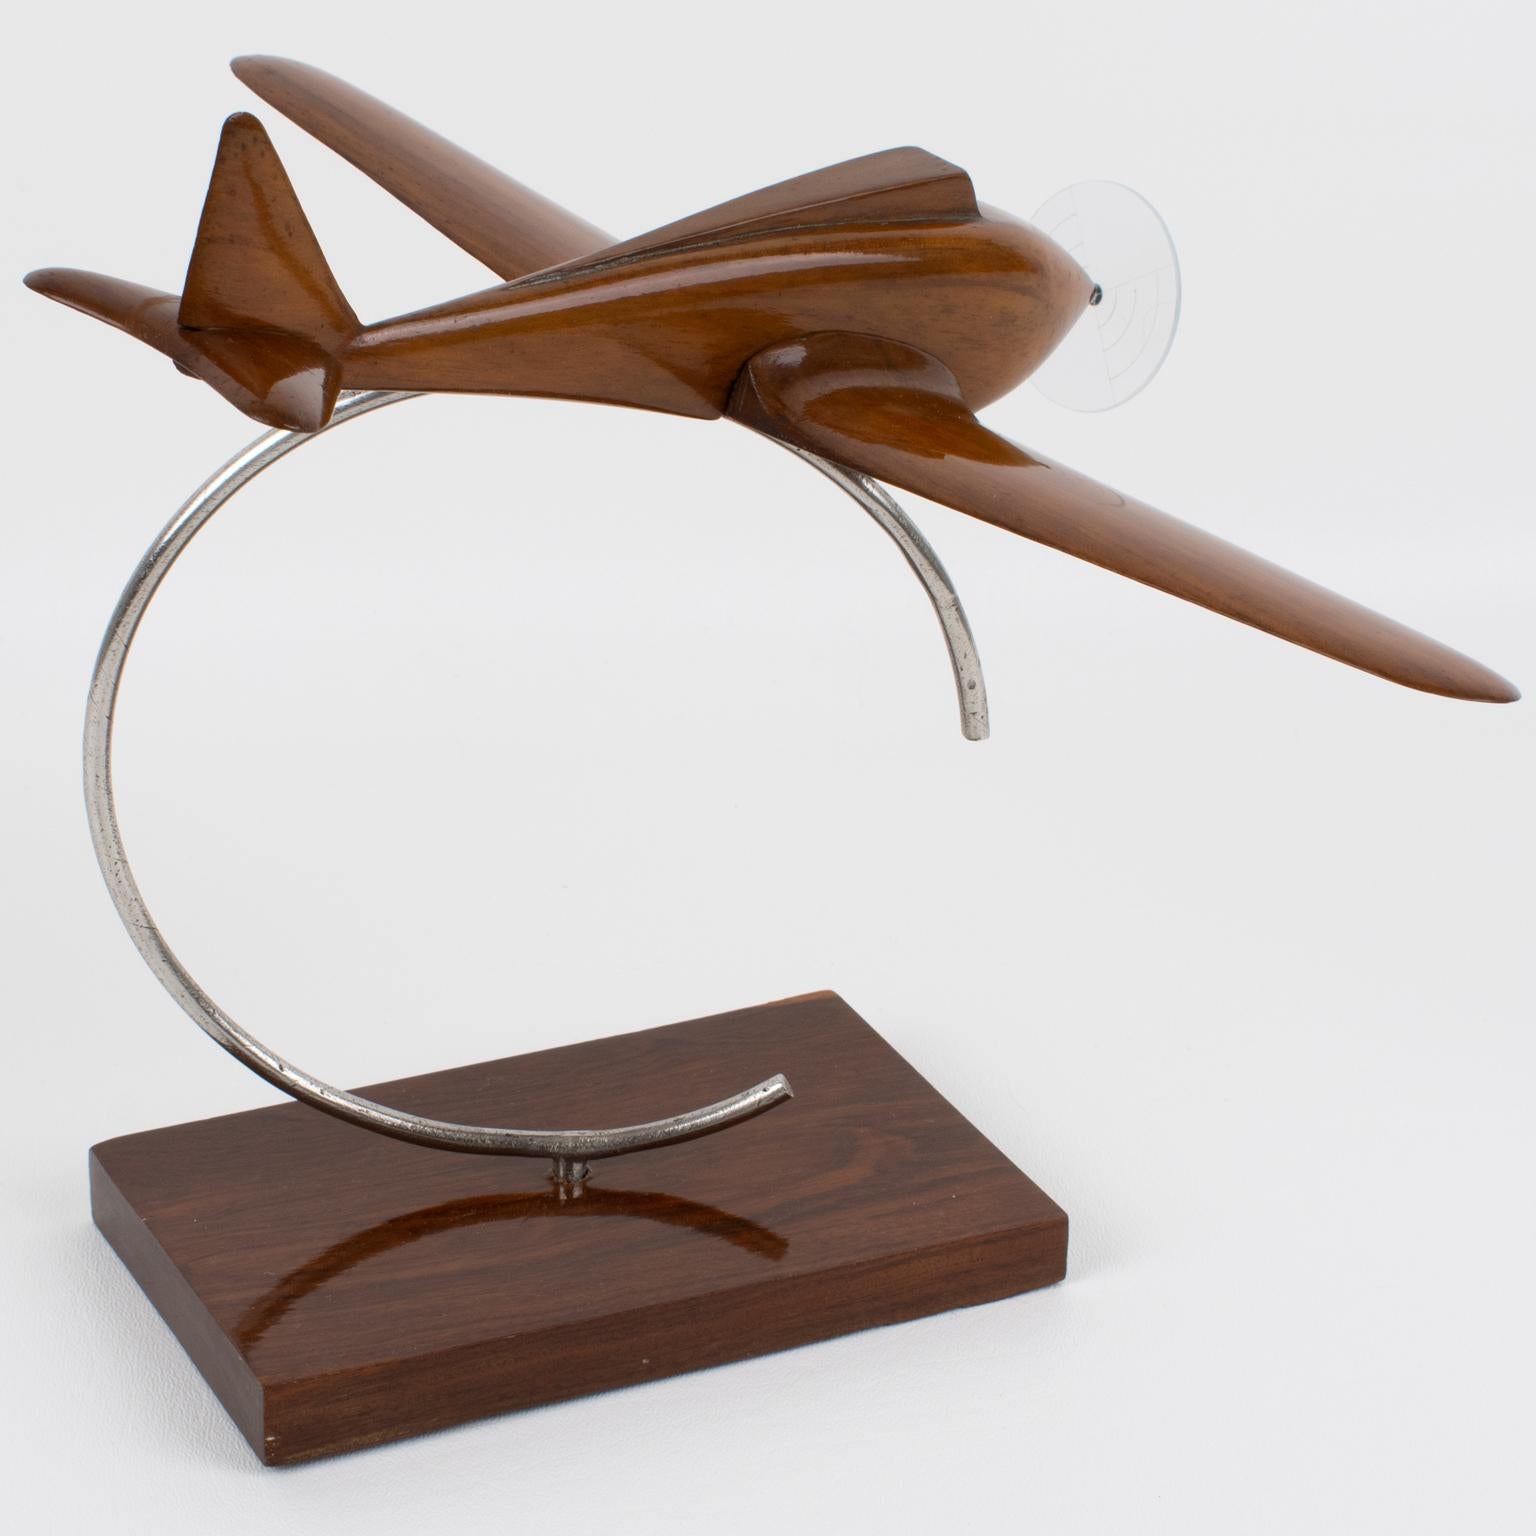 Mid-20th Century Art Deco Wood and Metal Airplane Aviation Propeller Model, France 1930s For Sale